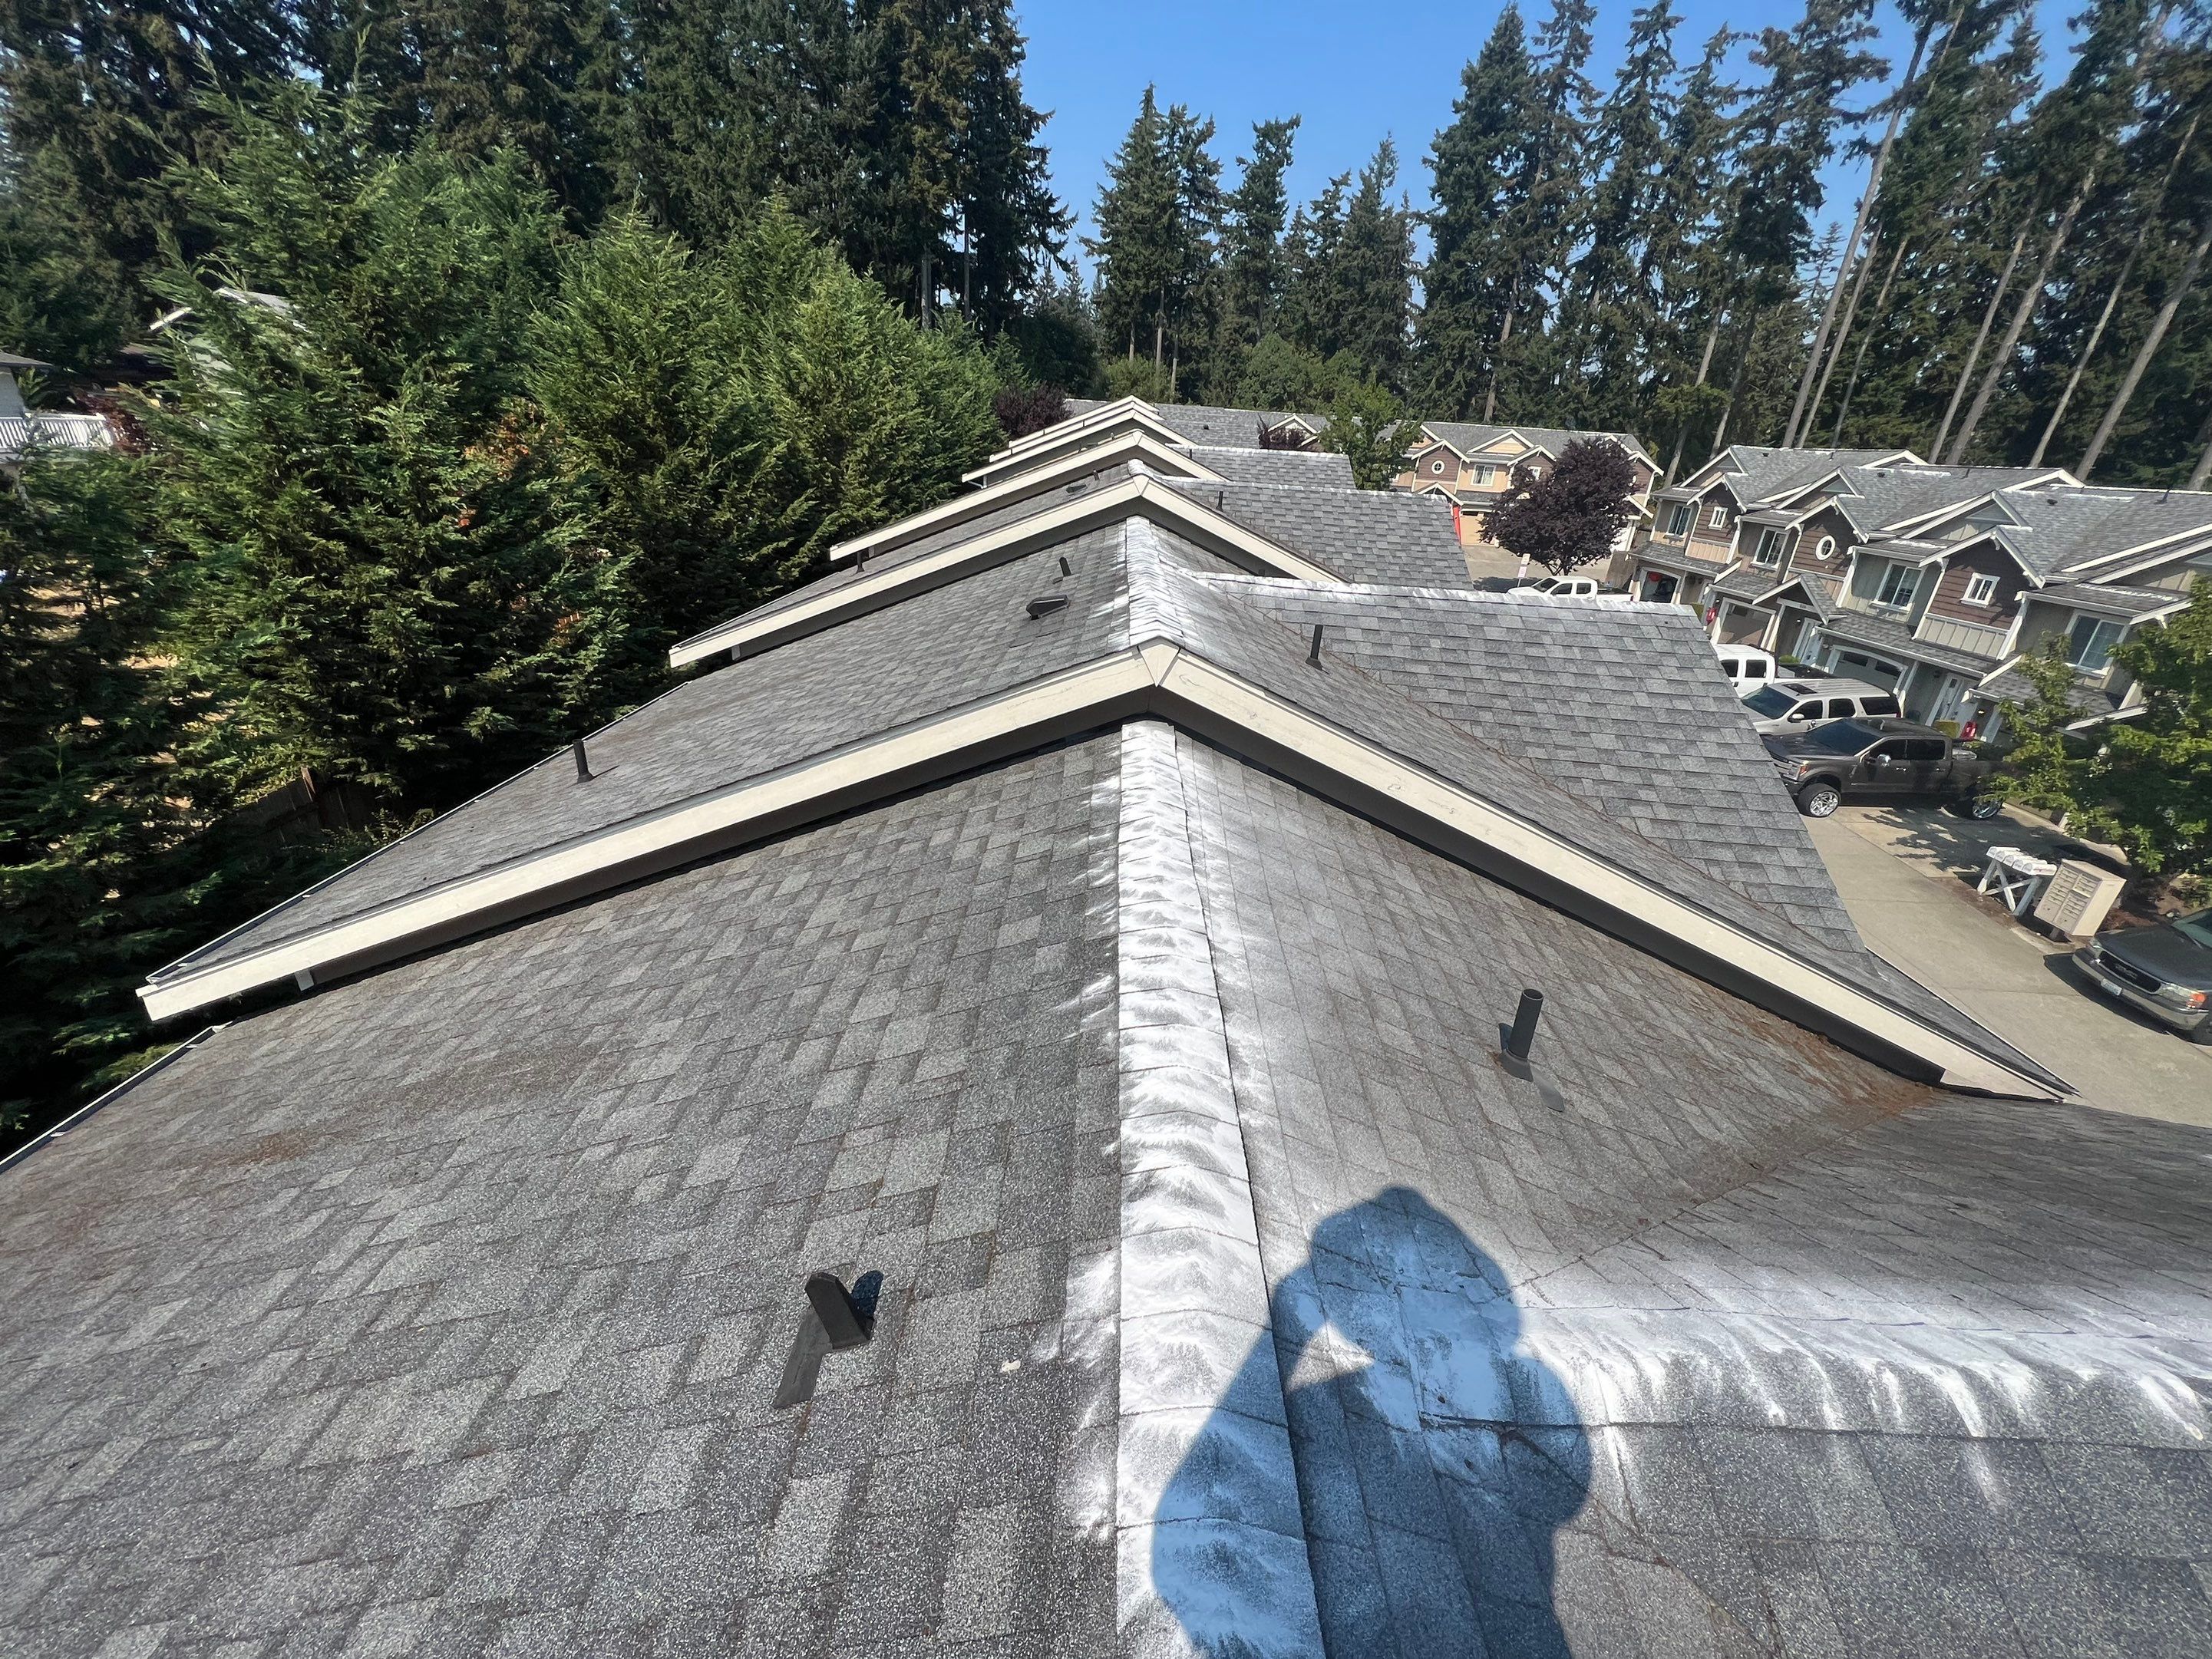 New roof after being cleaned with moss kill on the ridge